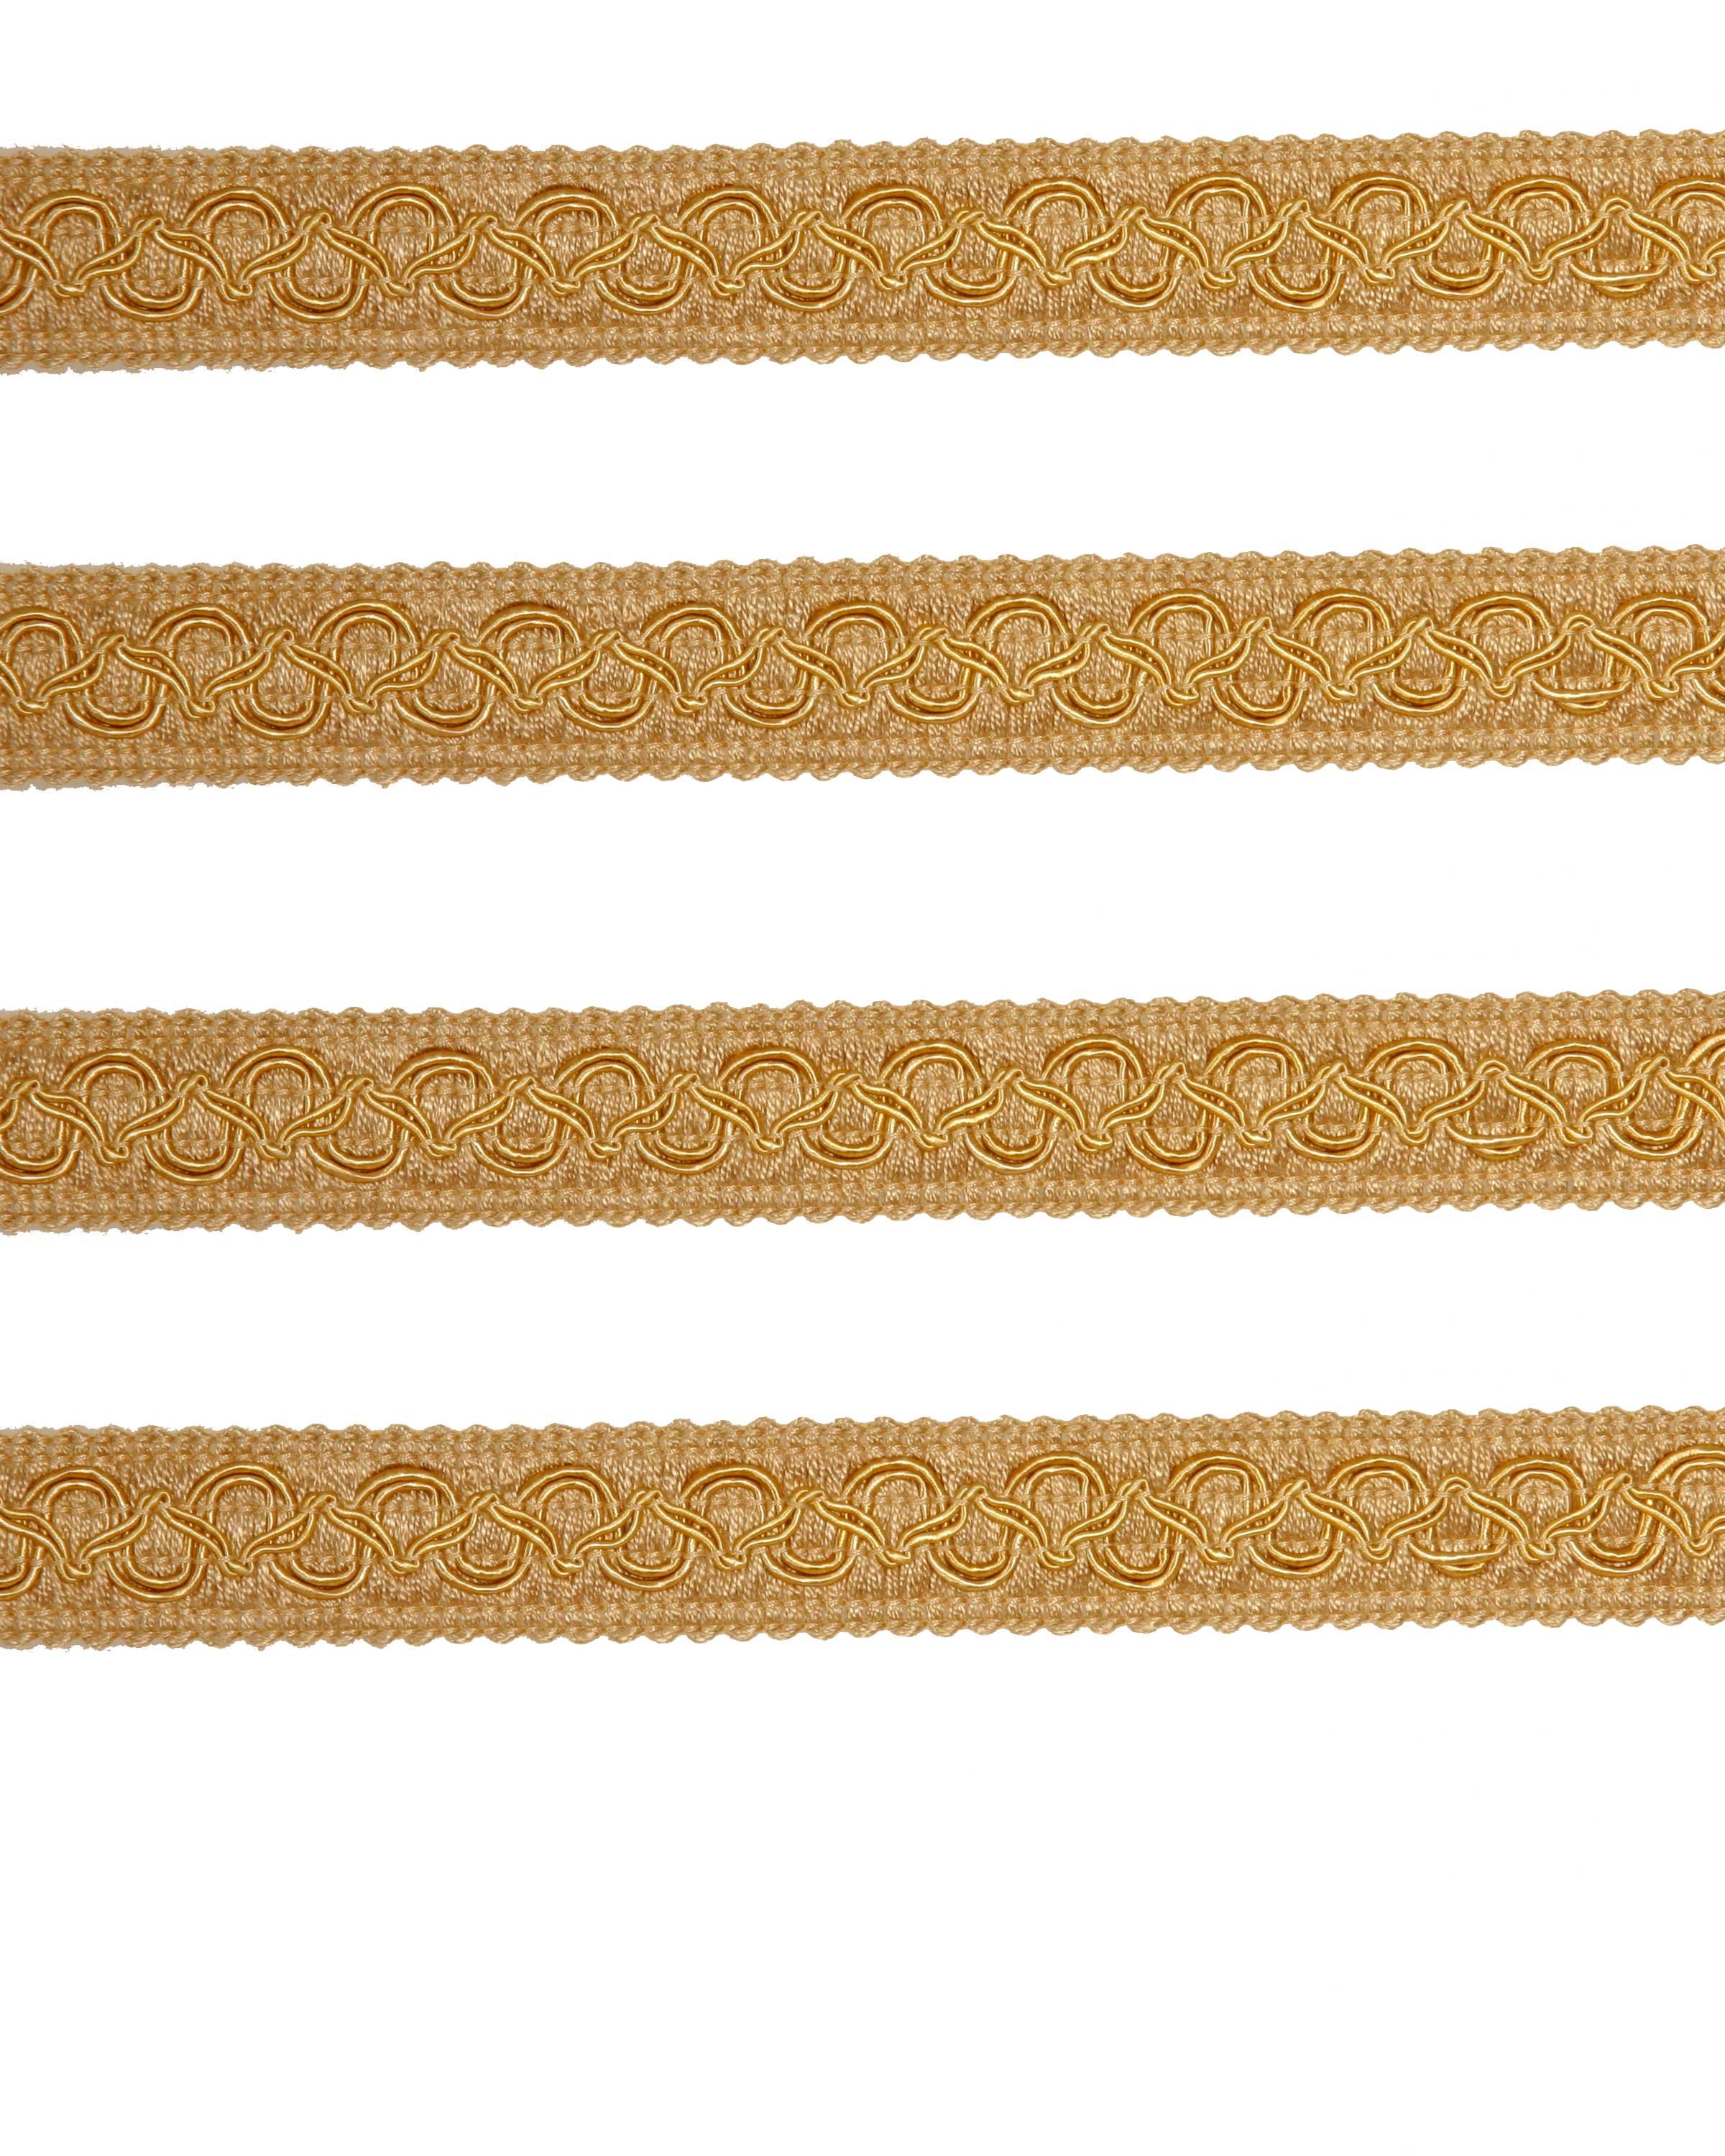 Fancy Braid - Gold 21mm Price is for 5 metres